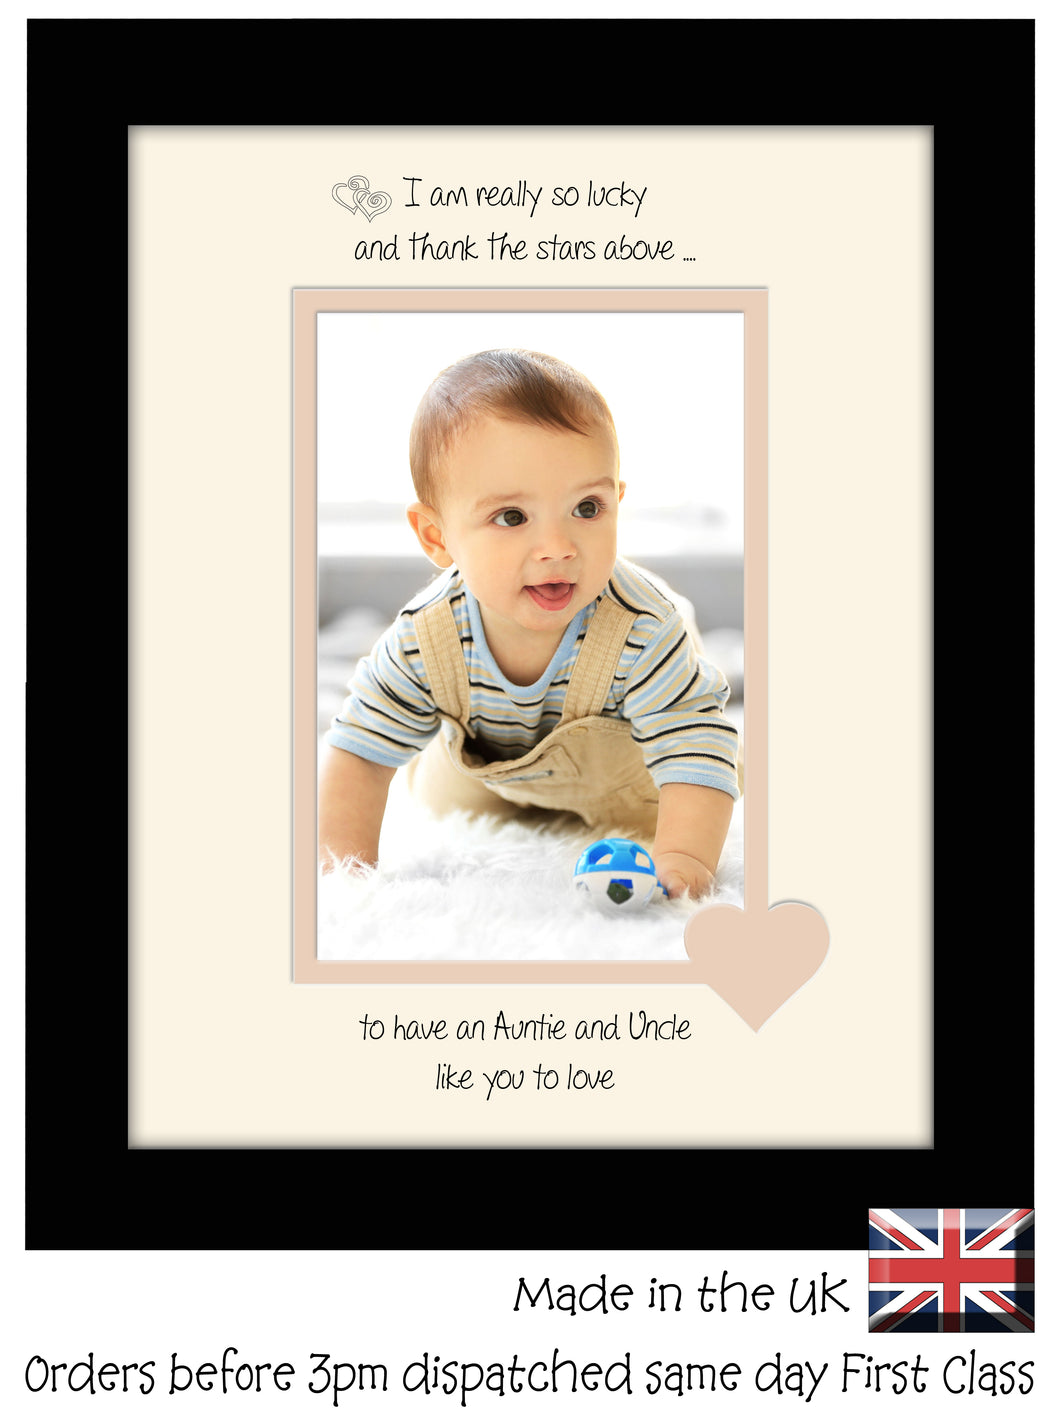 Auntie & Uncle Photo Frame - I Thank the stars Auntie & Uncle Portrait photo frame 6